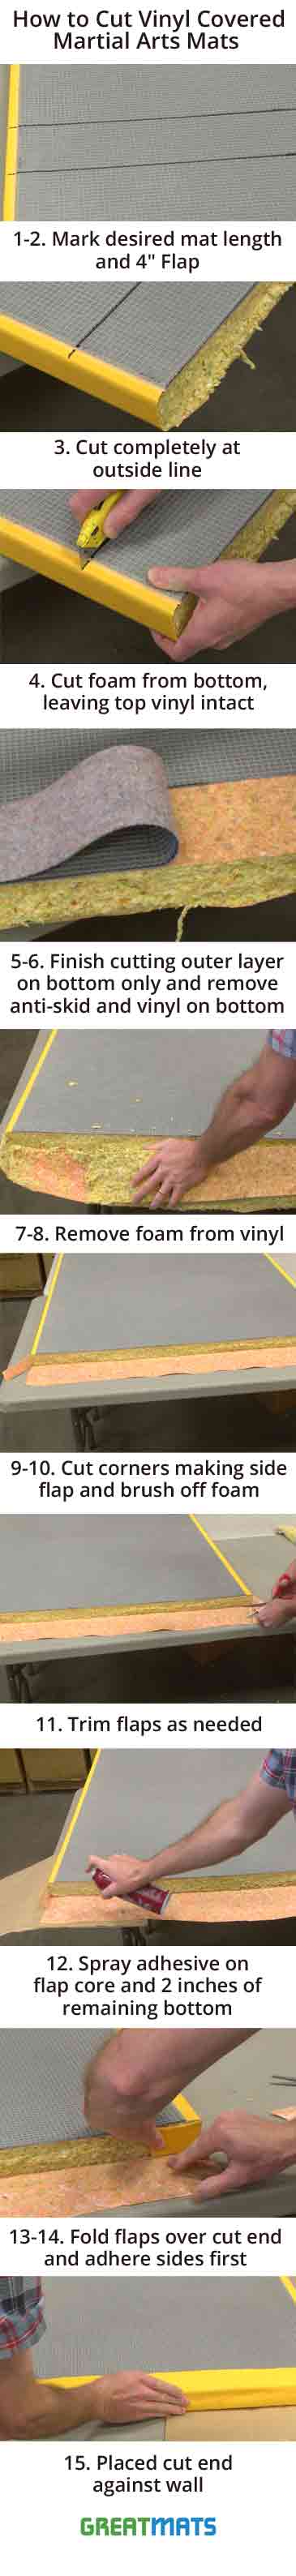 How to Cut Vinyl Wrapped Martial Arts Mats info graphic.